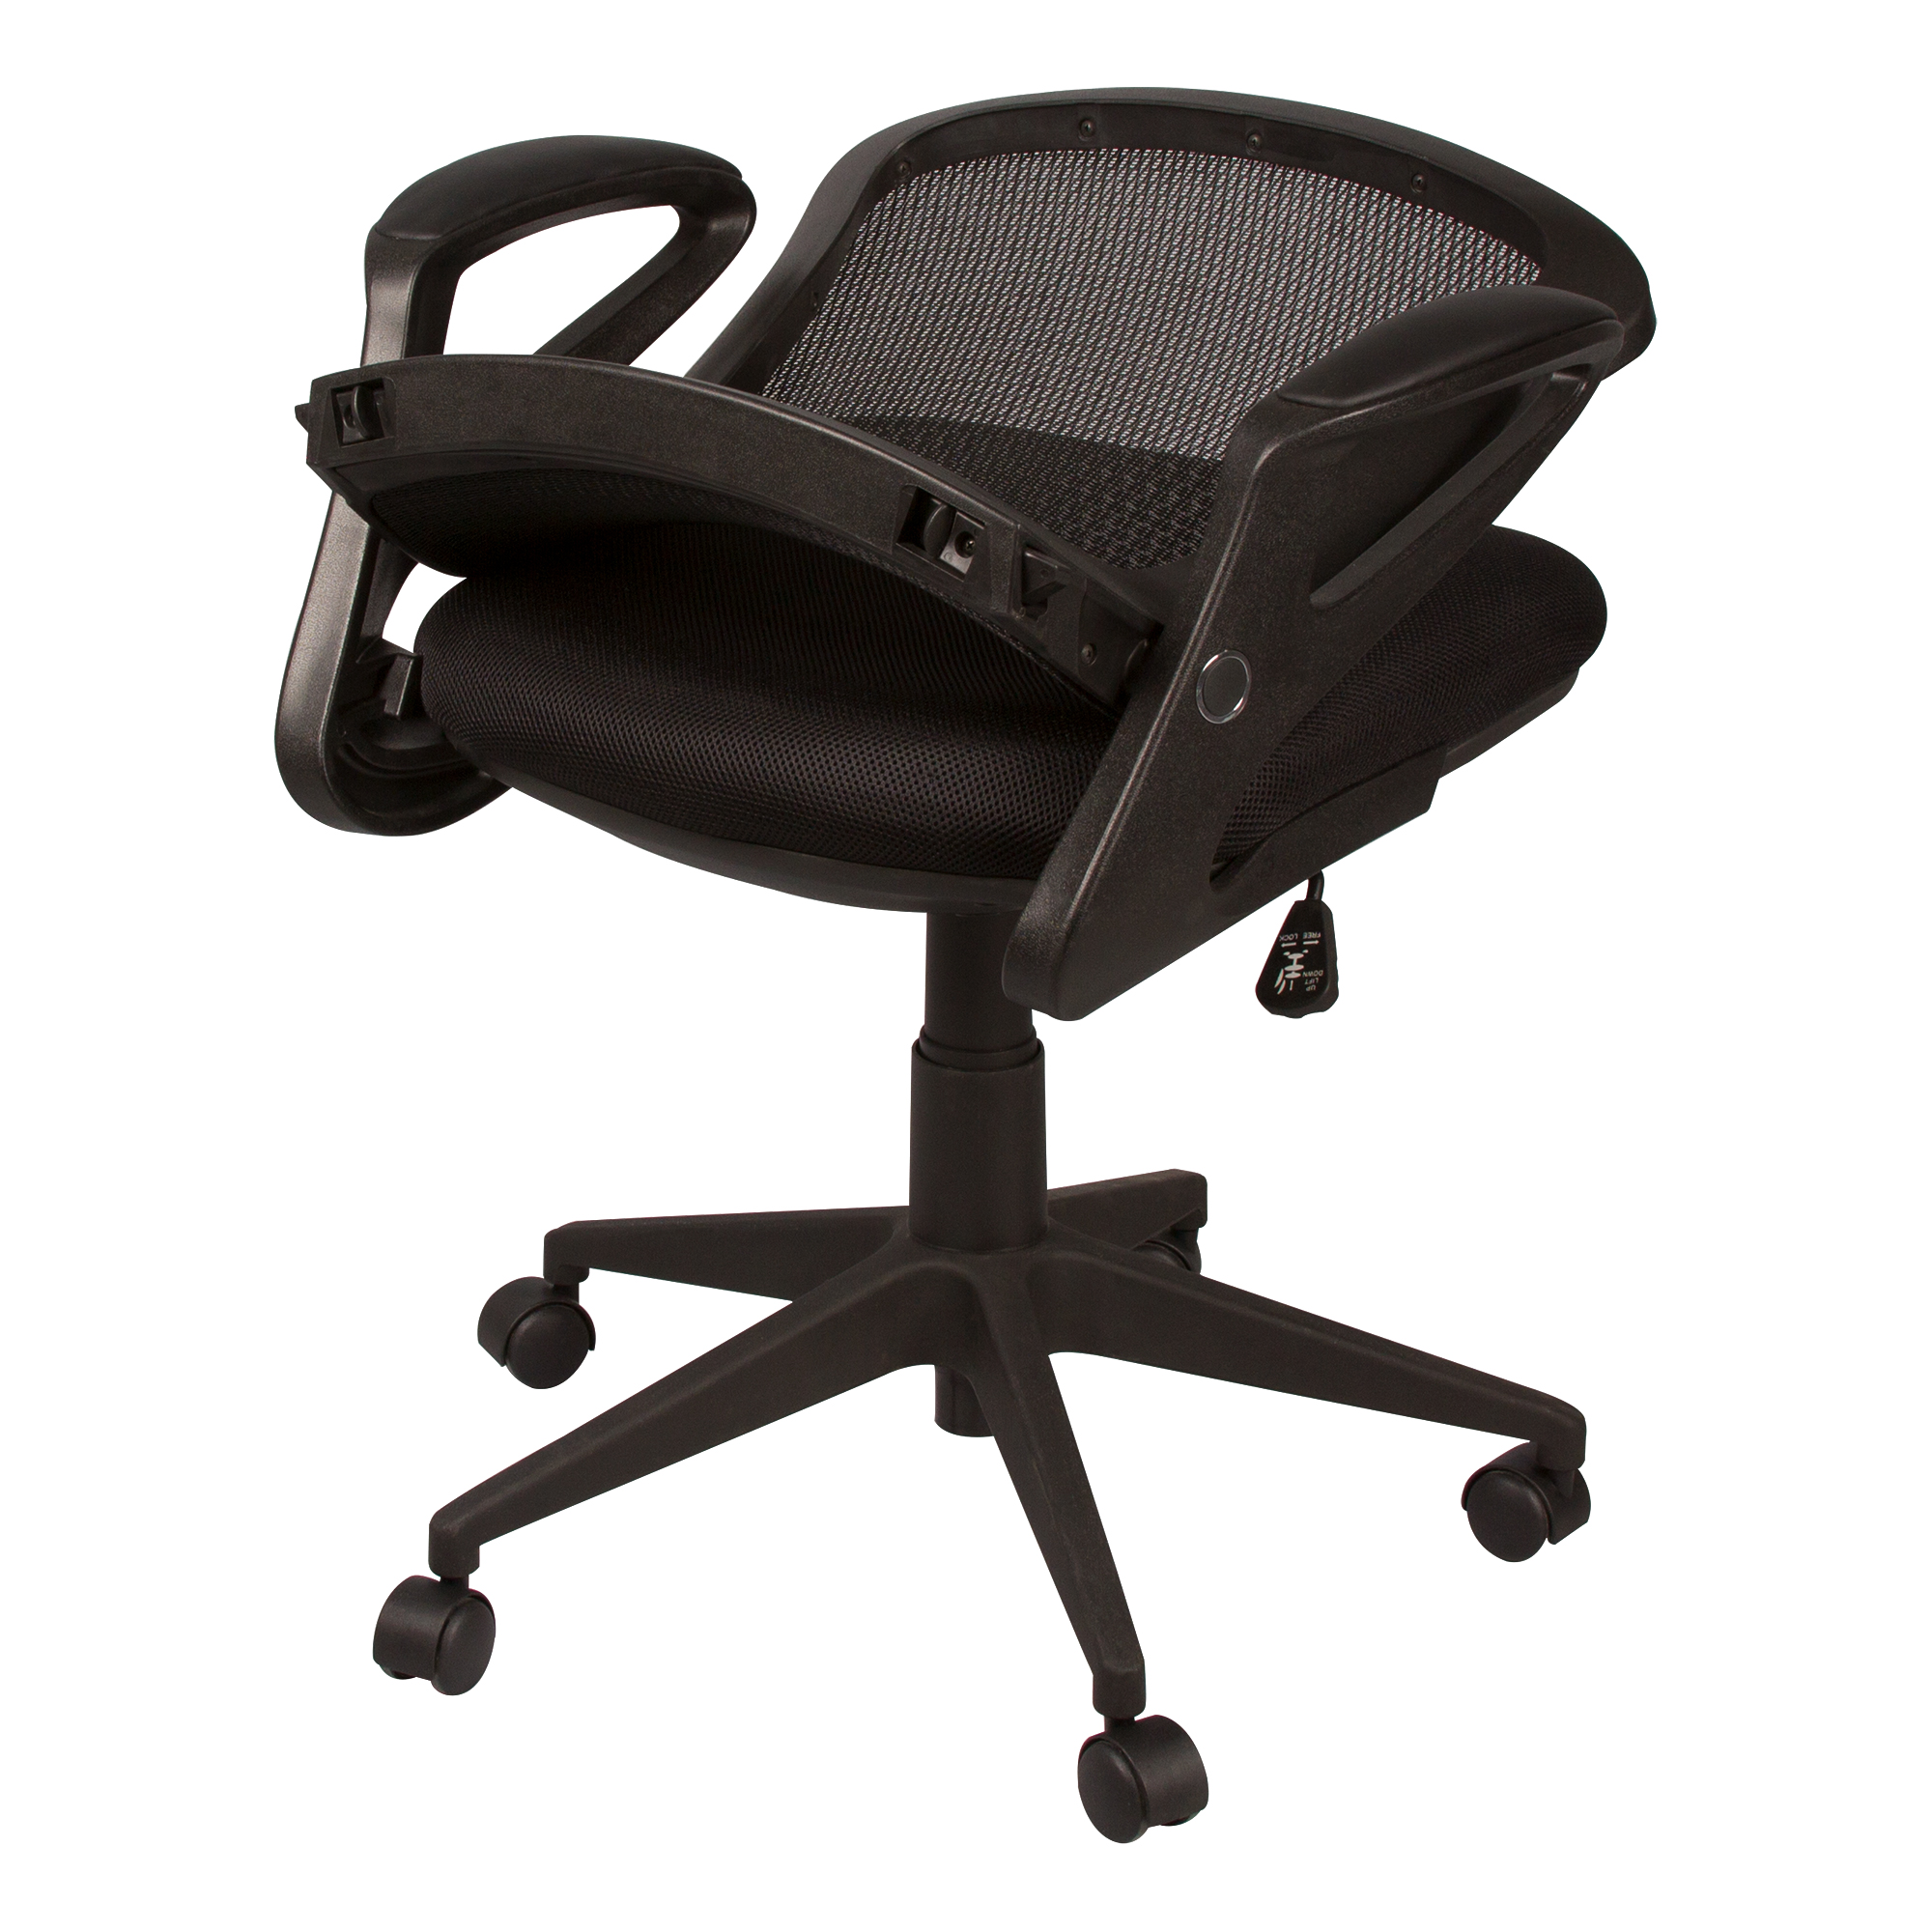 Mesh Back Office Chair w/ Foldable Seat 